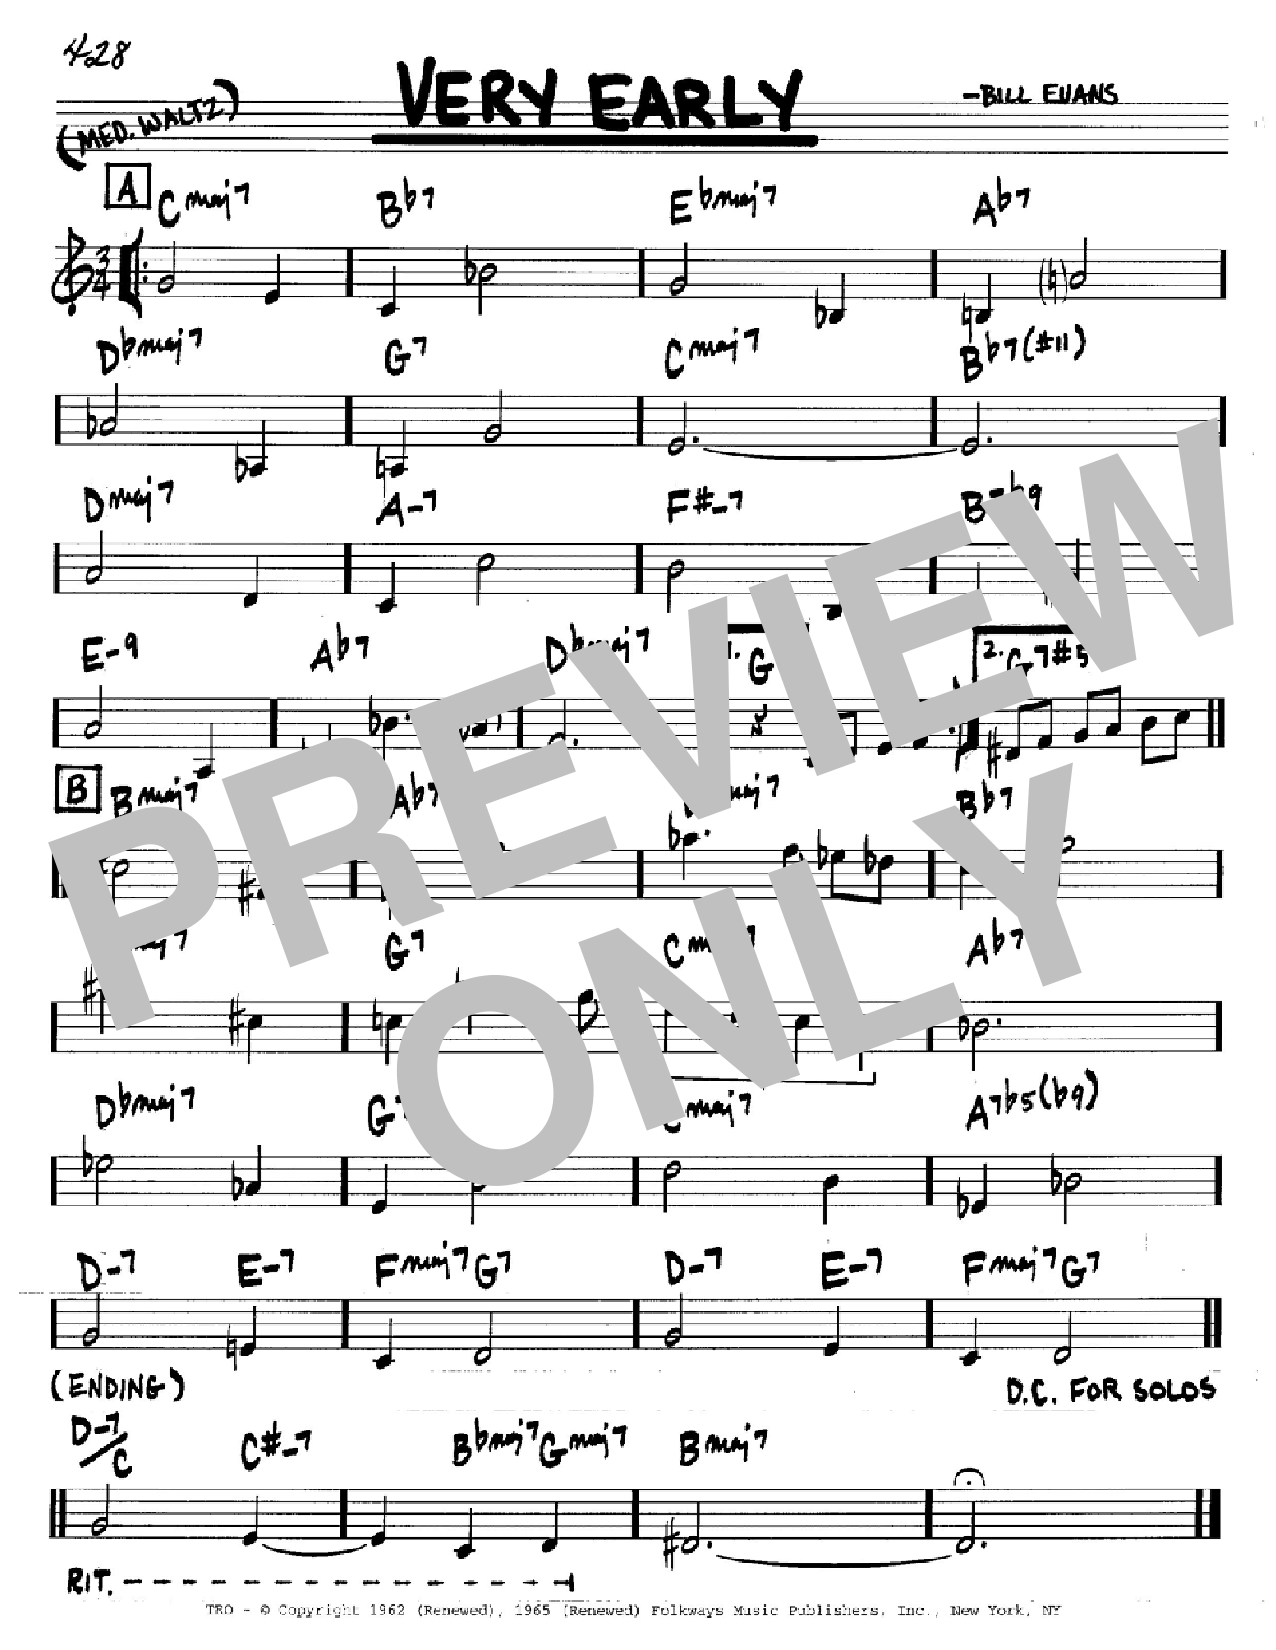 Download Bill Evans Very Early Sheet Music